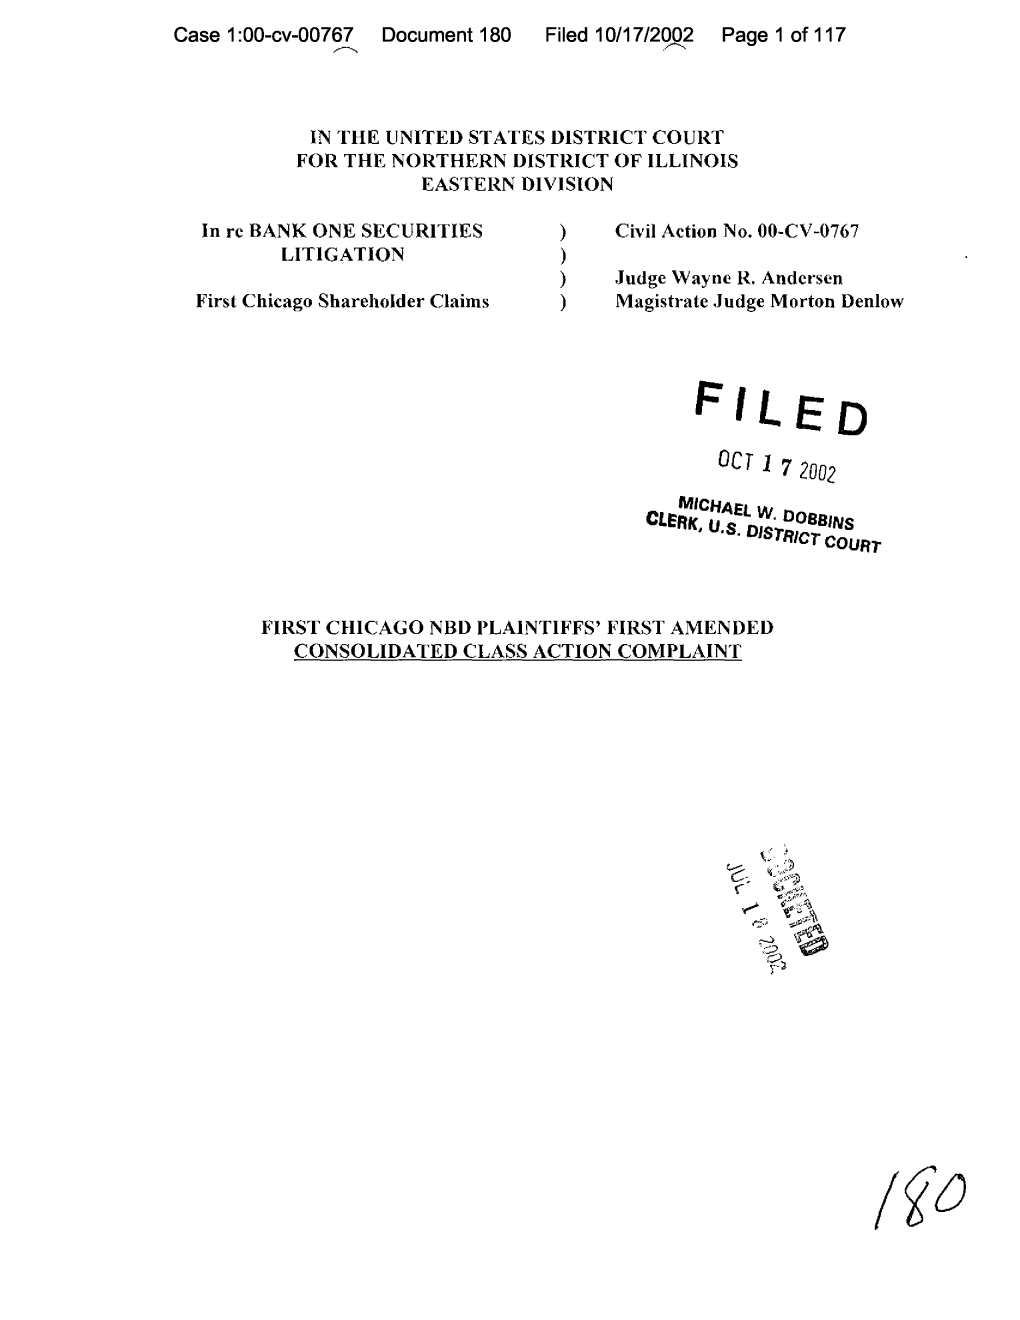 Bank One Securities Litigation 00-CV-00767-First Chicago NBD